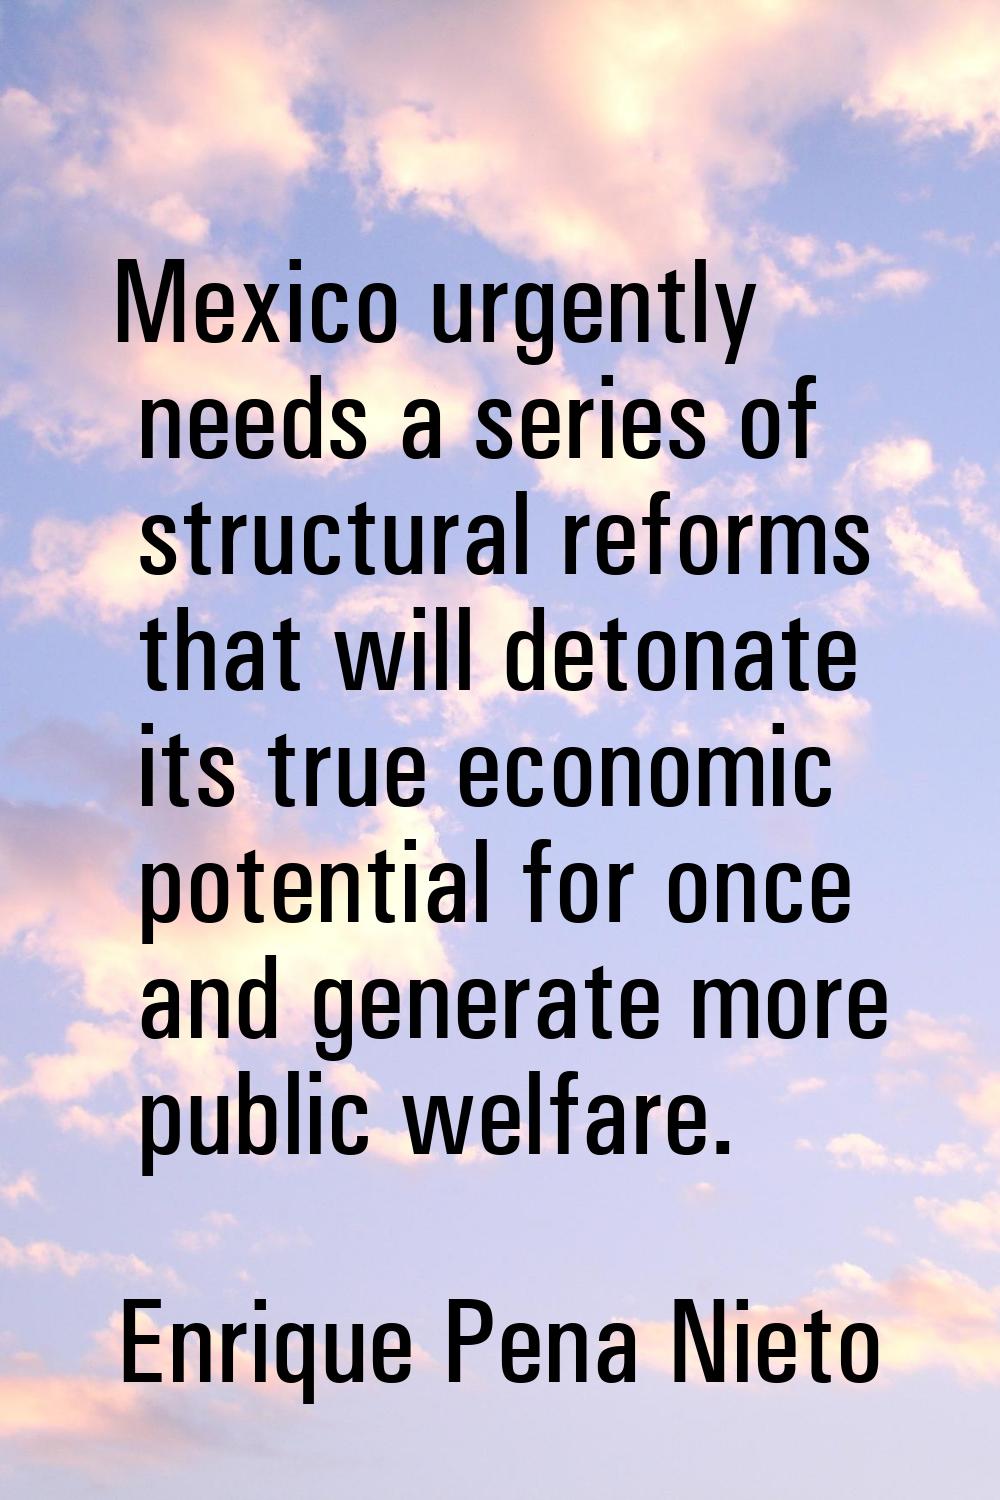 Mexico urgently needs a series of structural reforms that will detonate its true economic potential